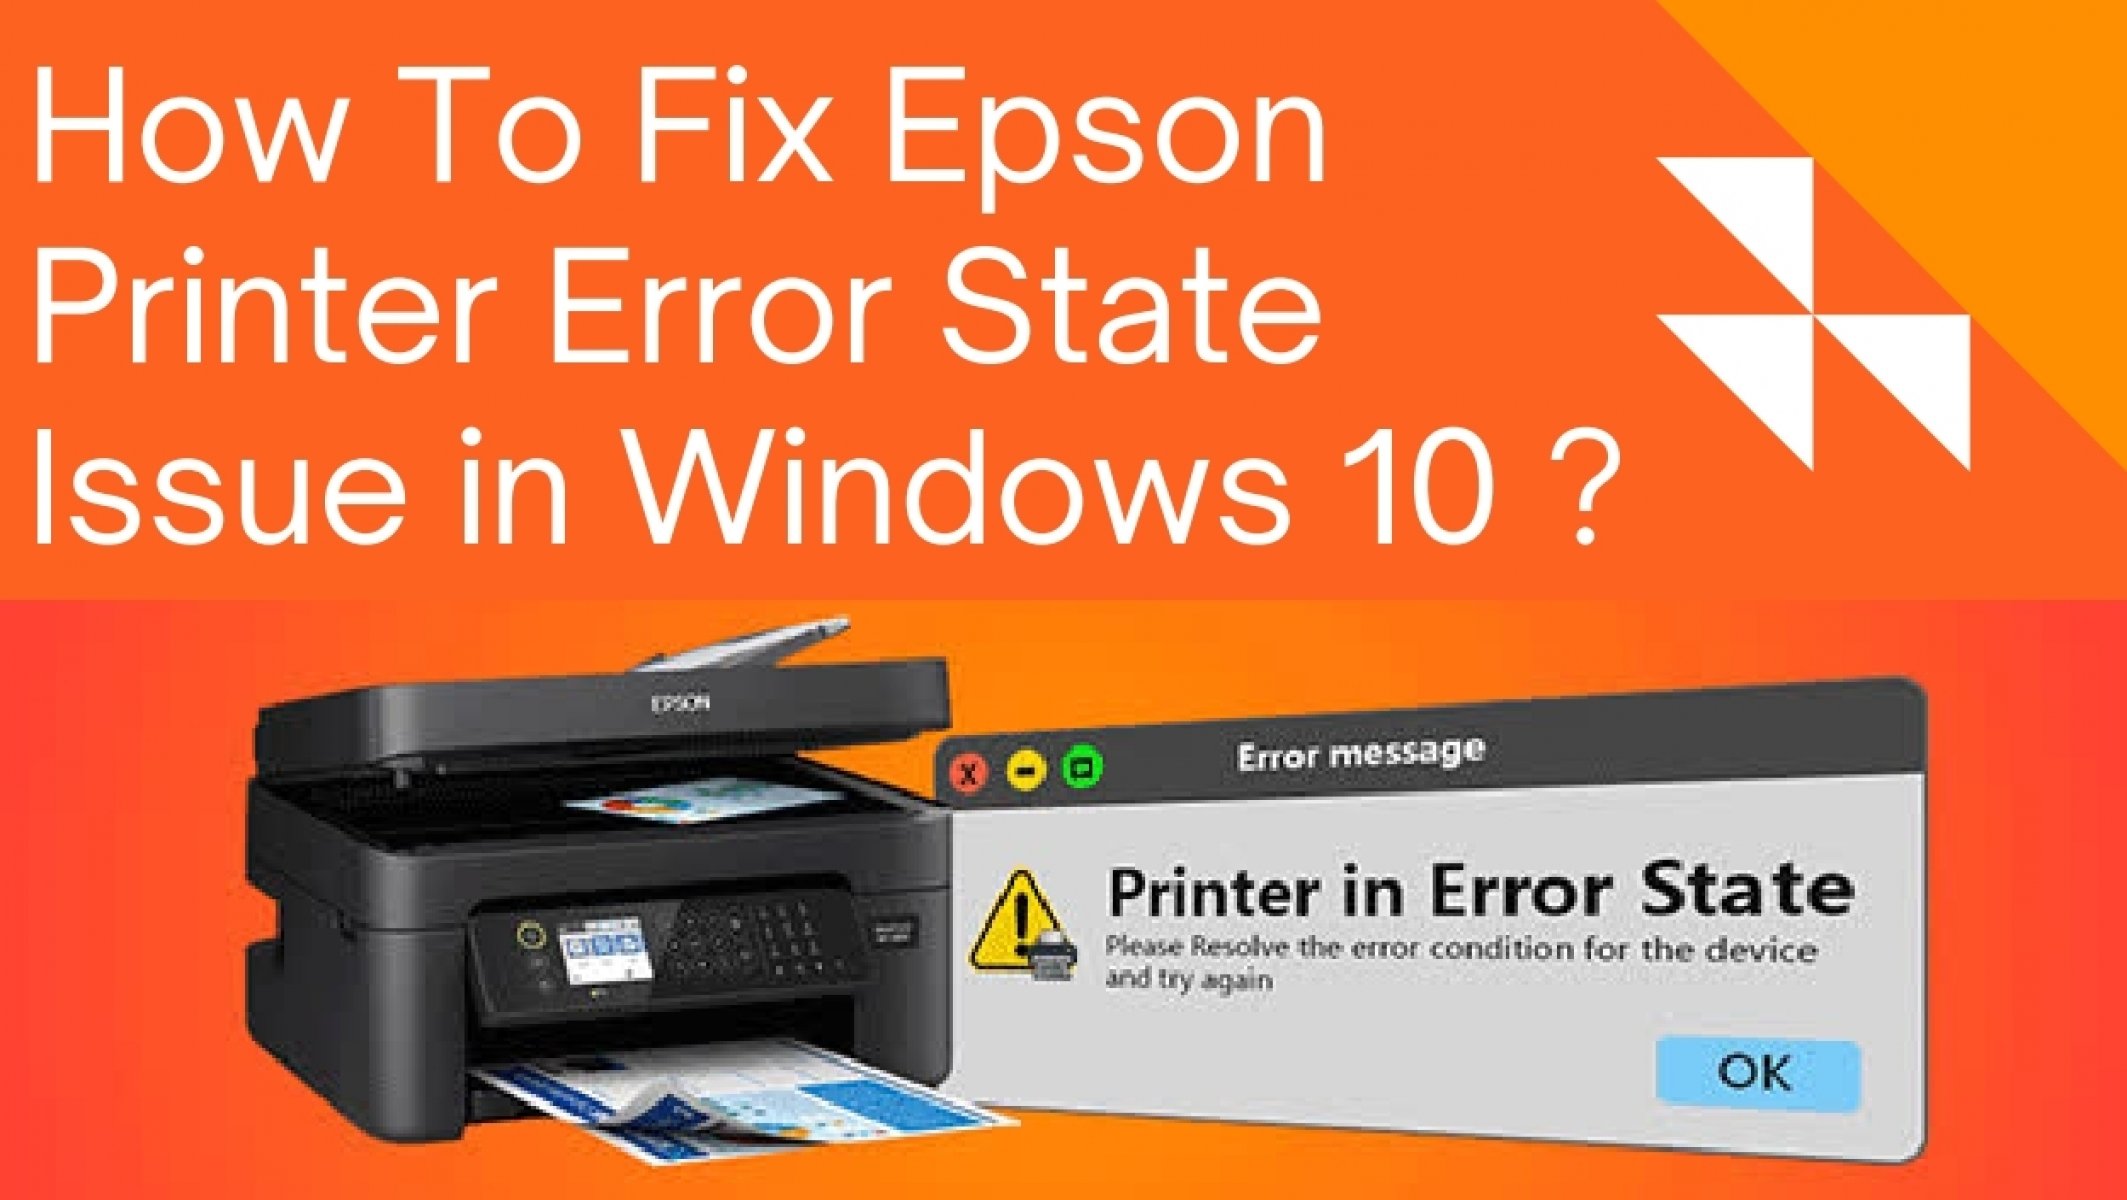 How To Fix Epson Printer Error State Issue In Windows 10 5641